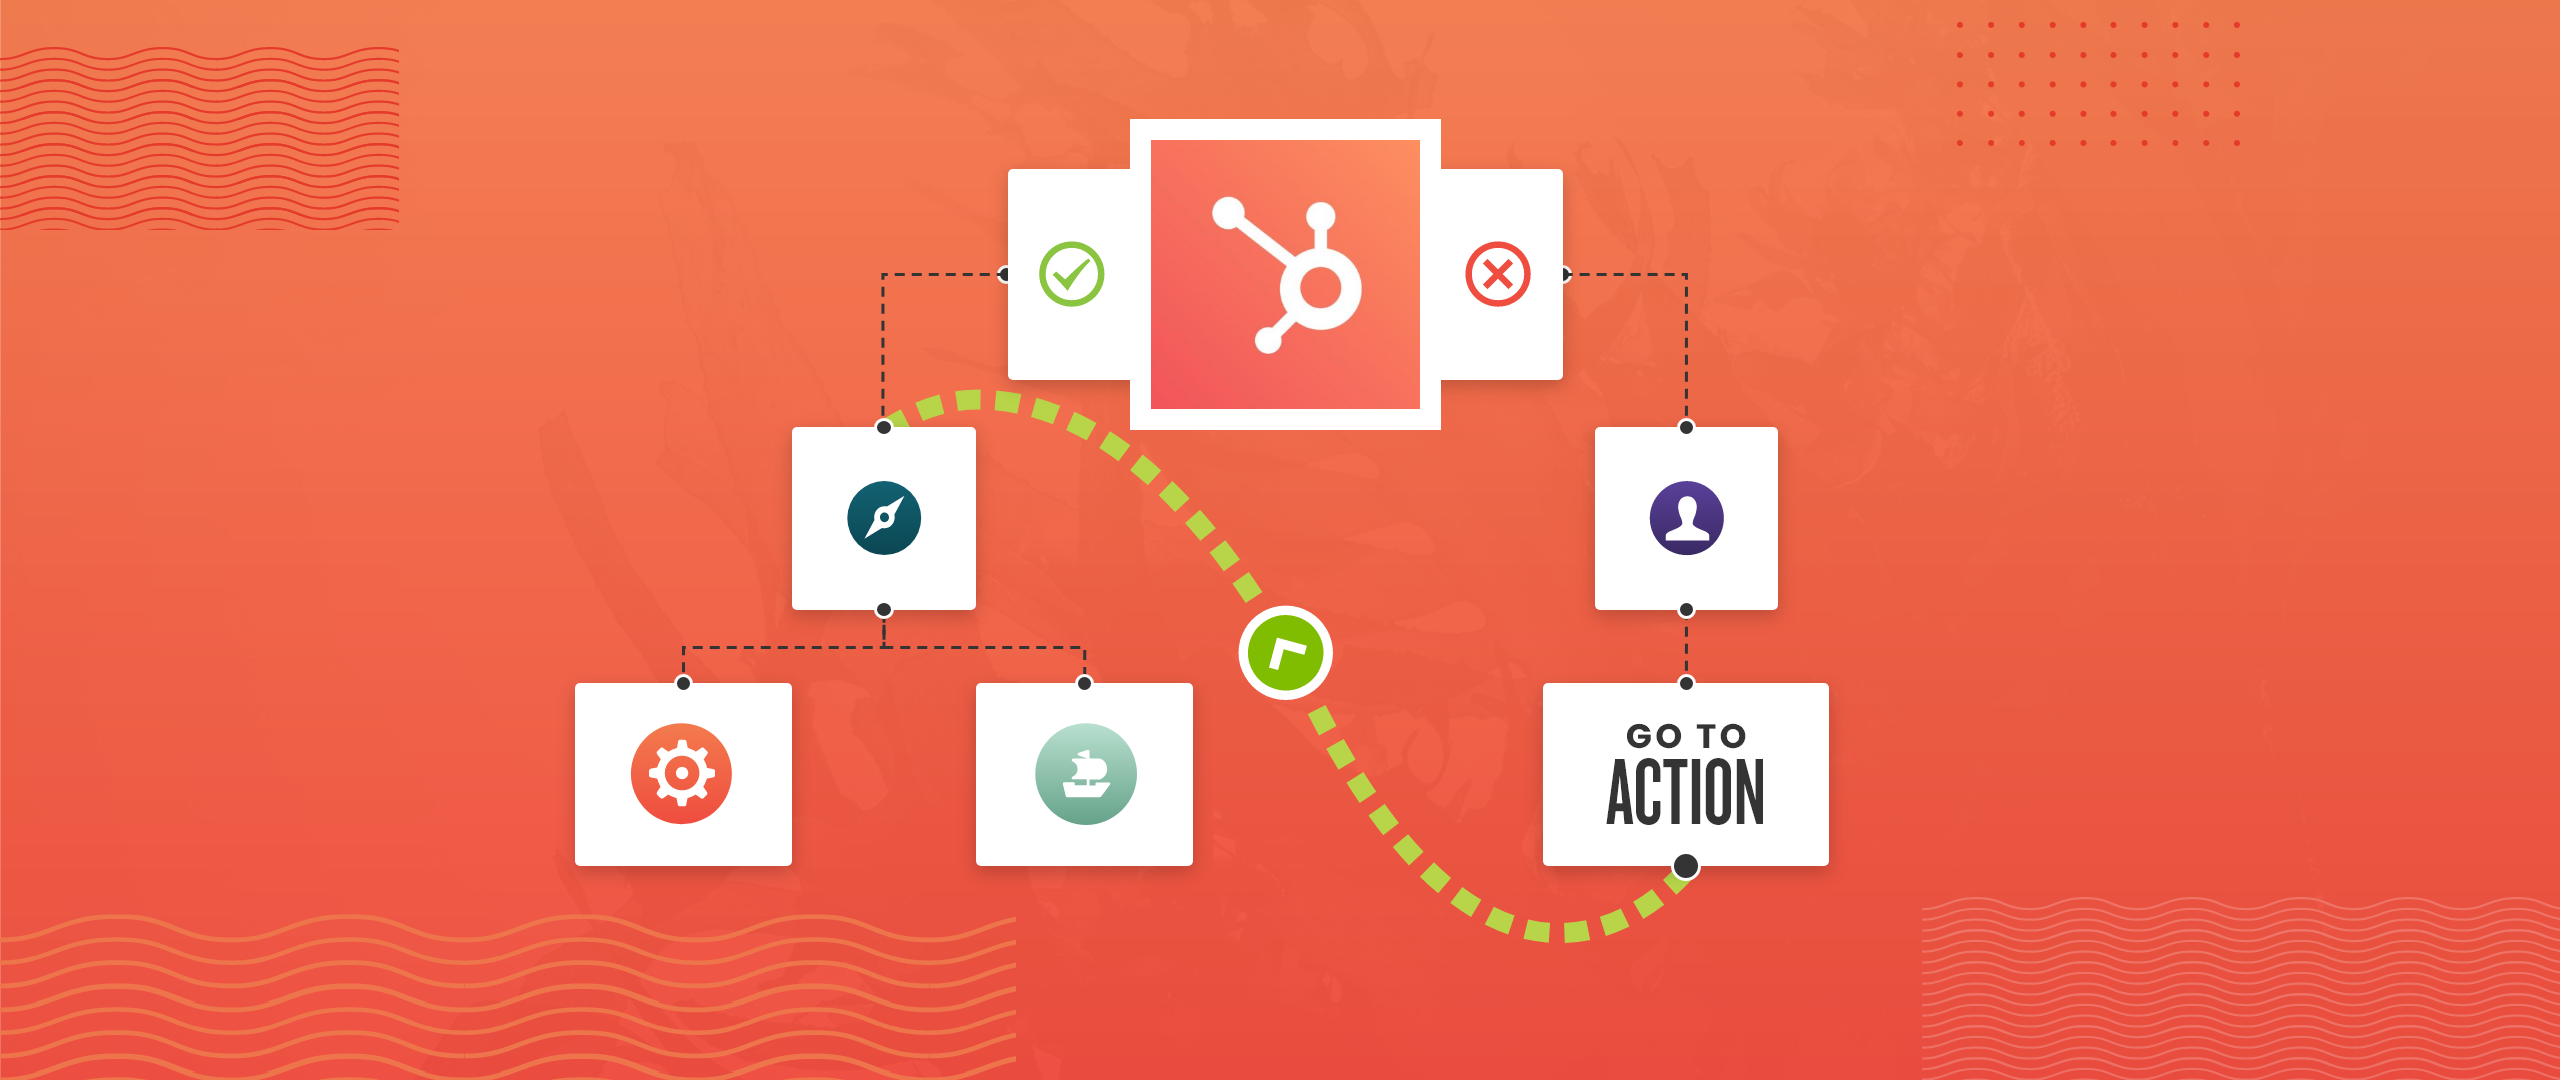 Understanding the new “Go to other action” tool in HubSpot workflows